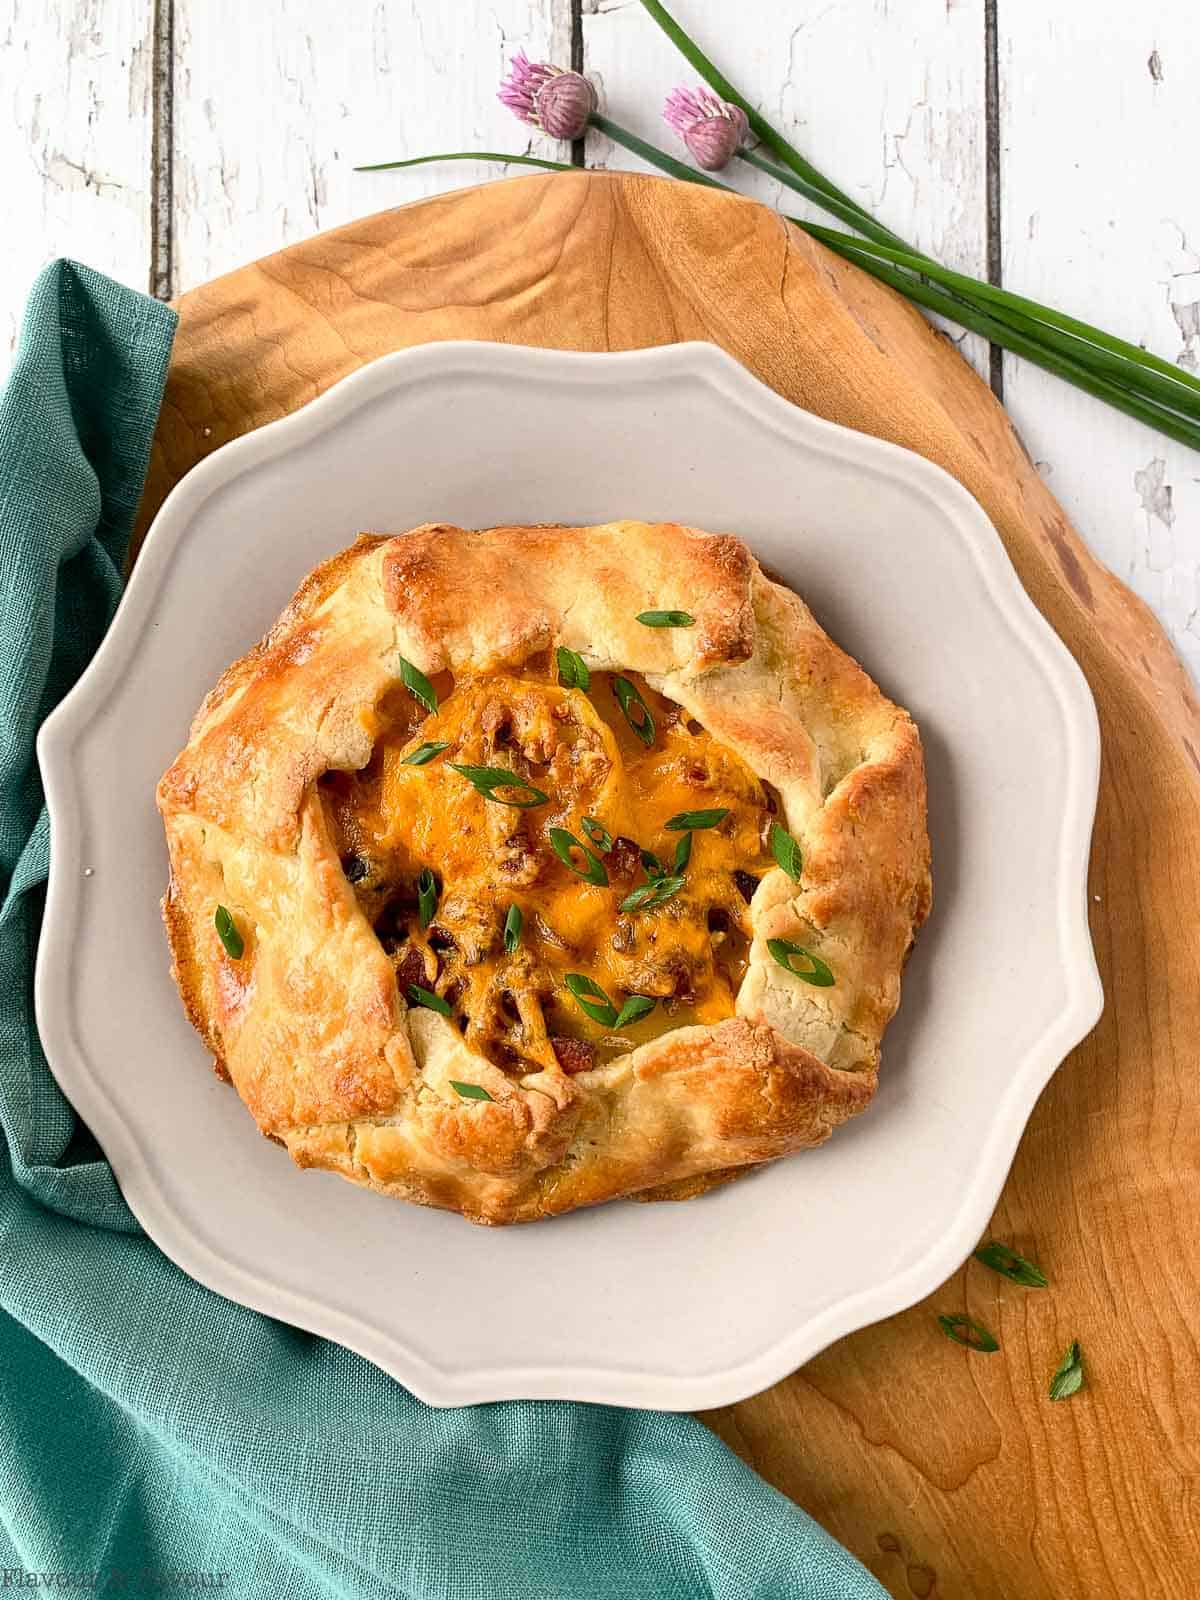 A potato cheese and bacon galette  garnished with snipped chives.